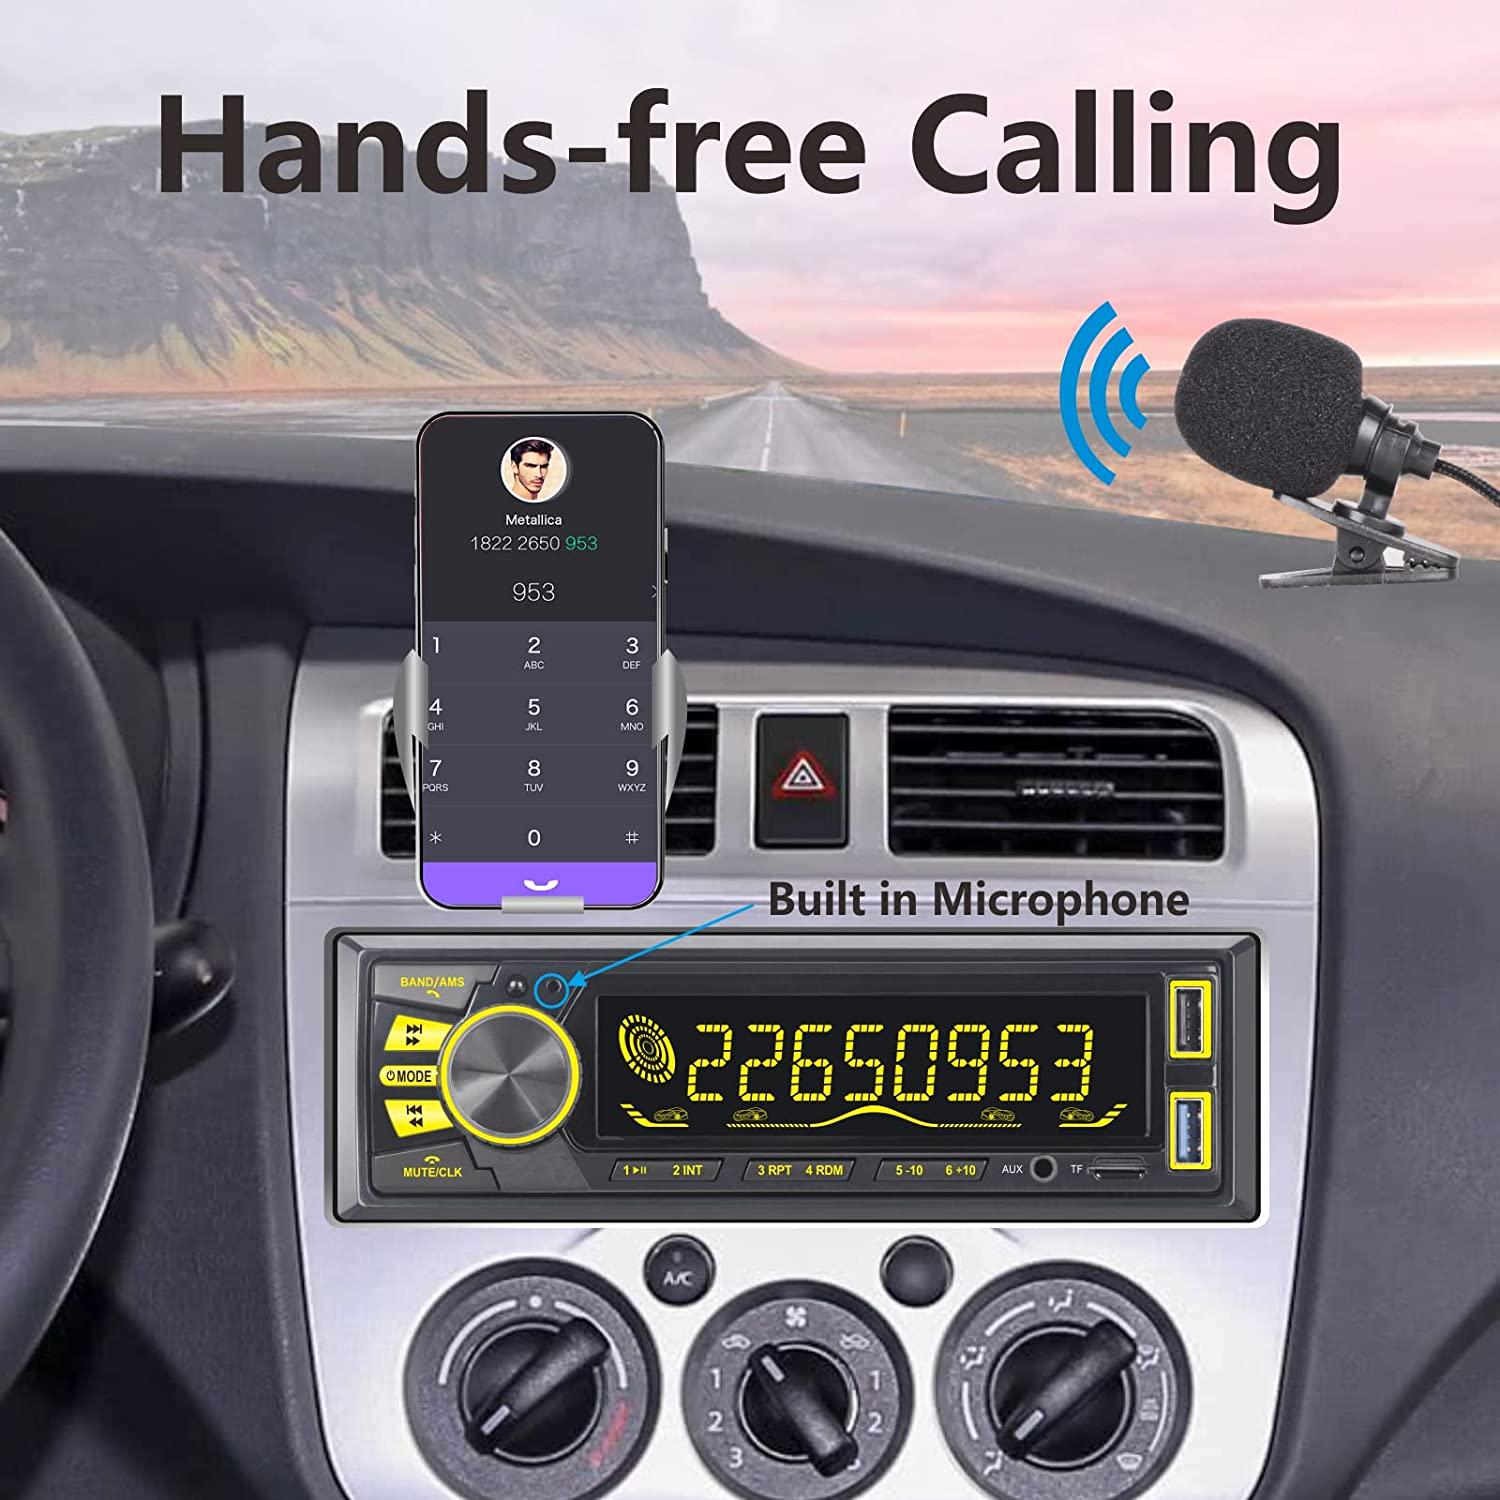 LXKLSZ, LXKLSZ Car Stereo Bluetooth 1 din with APP Control MP3 Player Support BT /FM/AM/ TF / AUX-in / Hands-Free Calls Double USB with Quick Charge External MIC Steering Wheel Remote